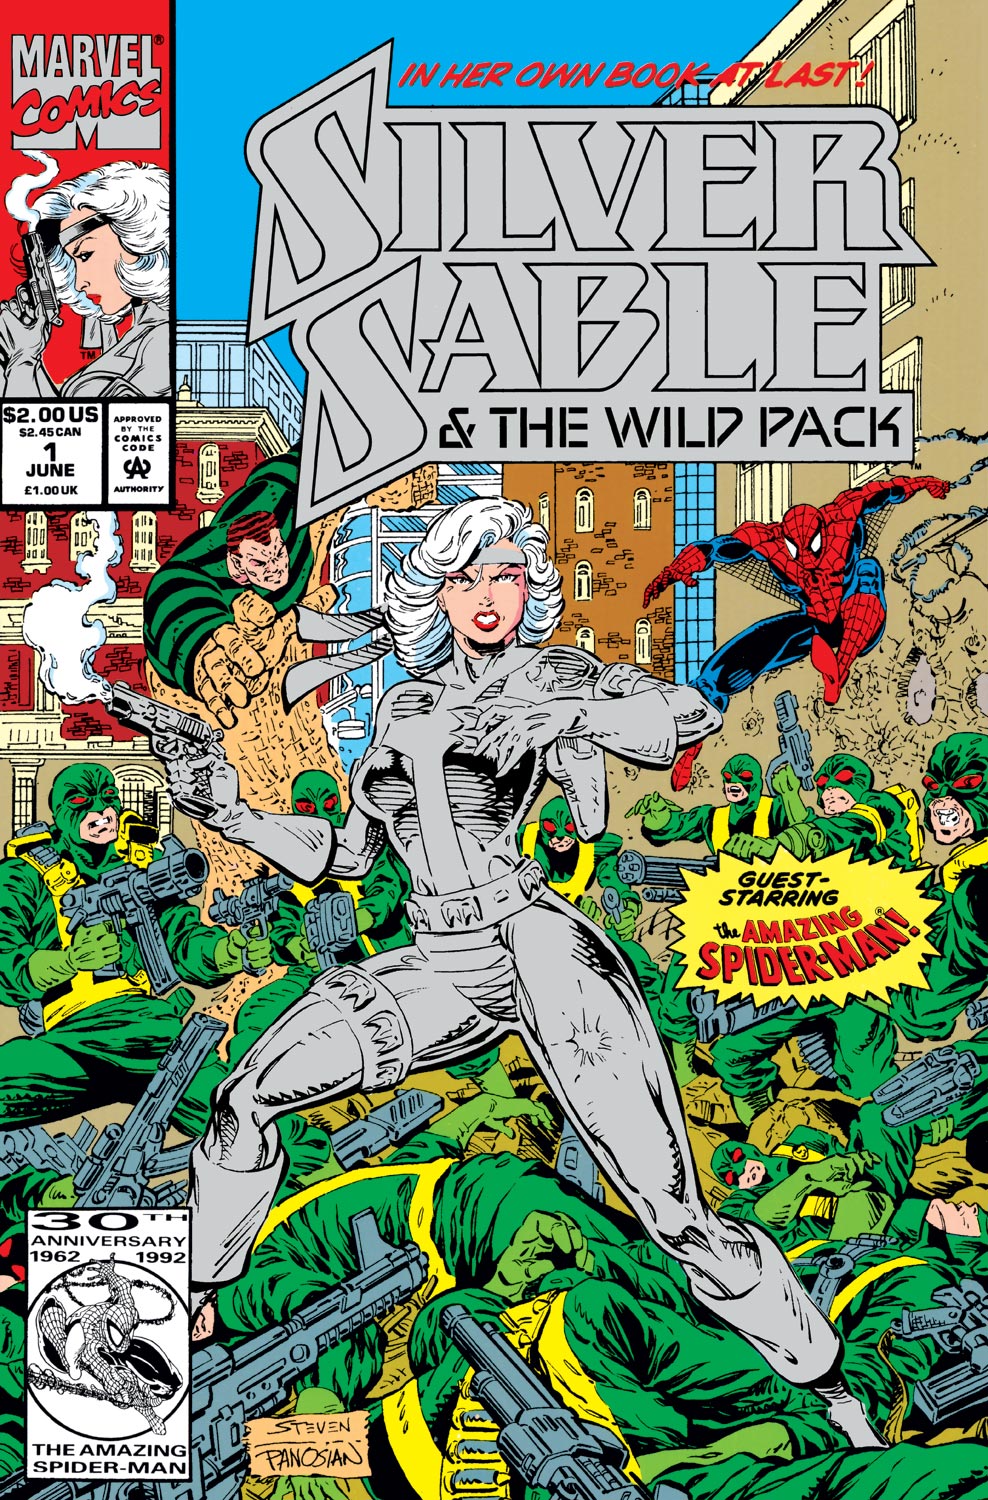 Silver sable & the wild pack